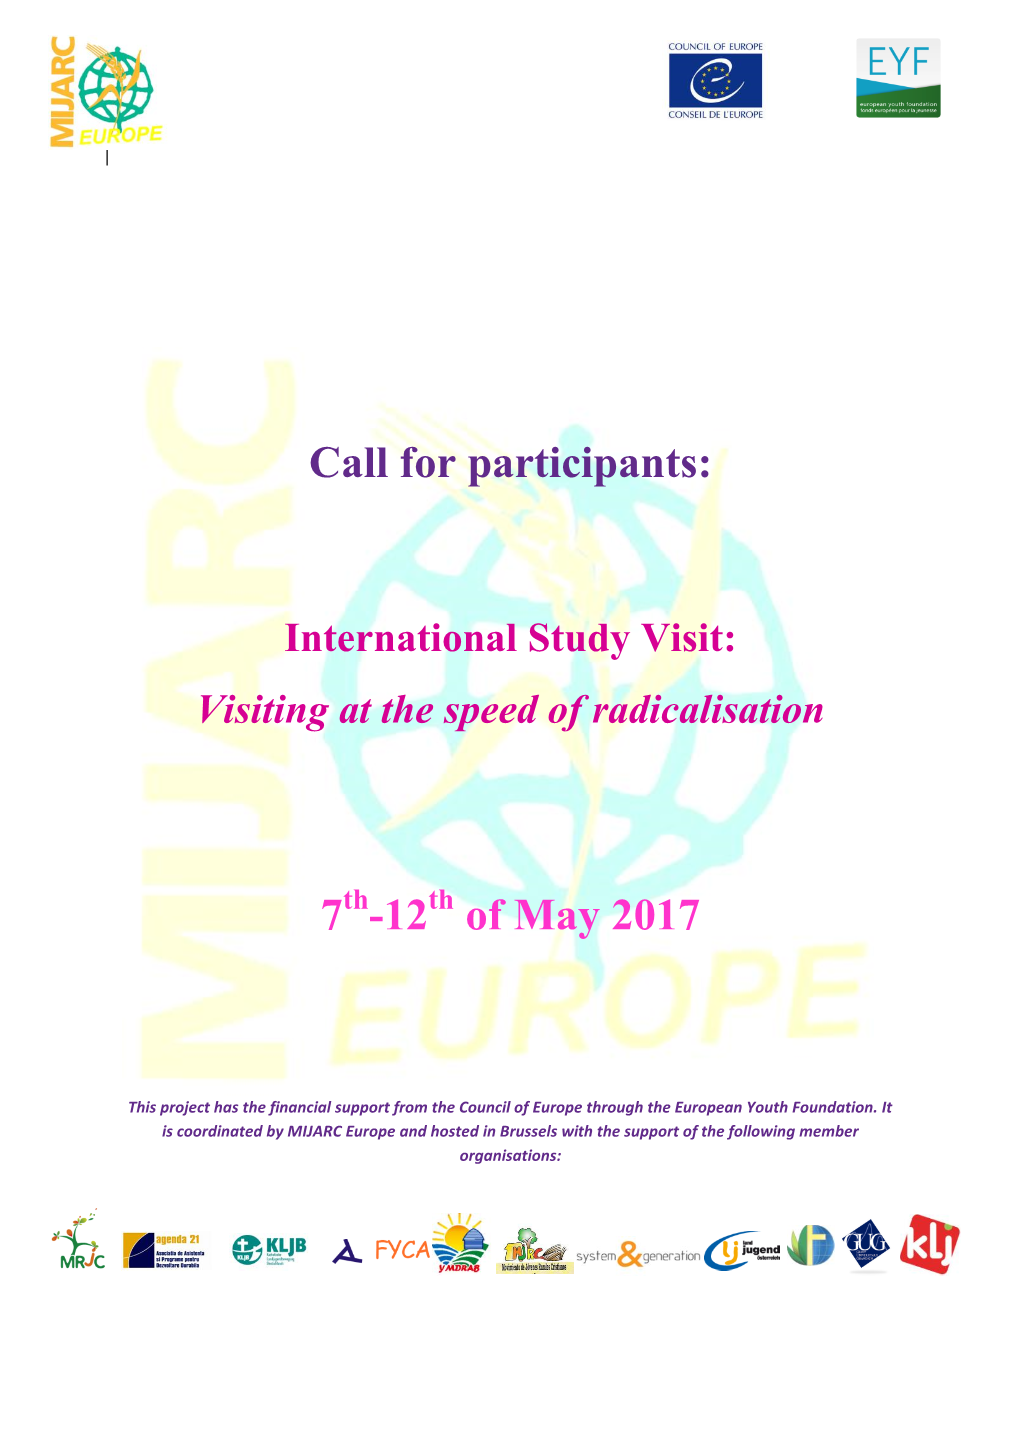 Call for Participants: 7 -12 of May 2017